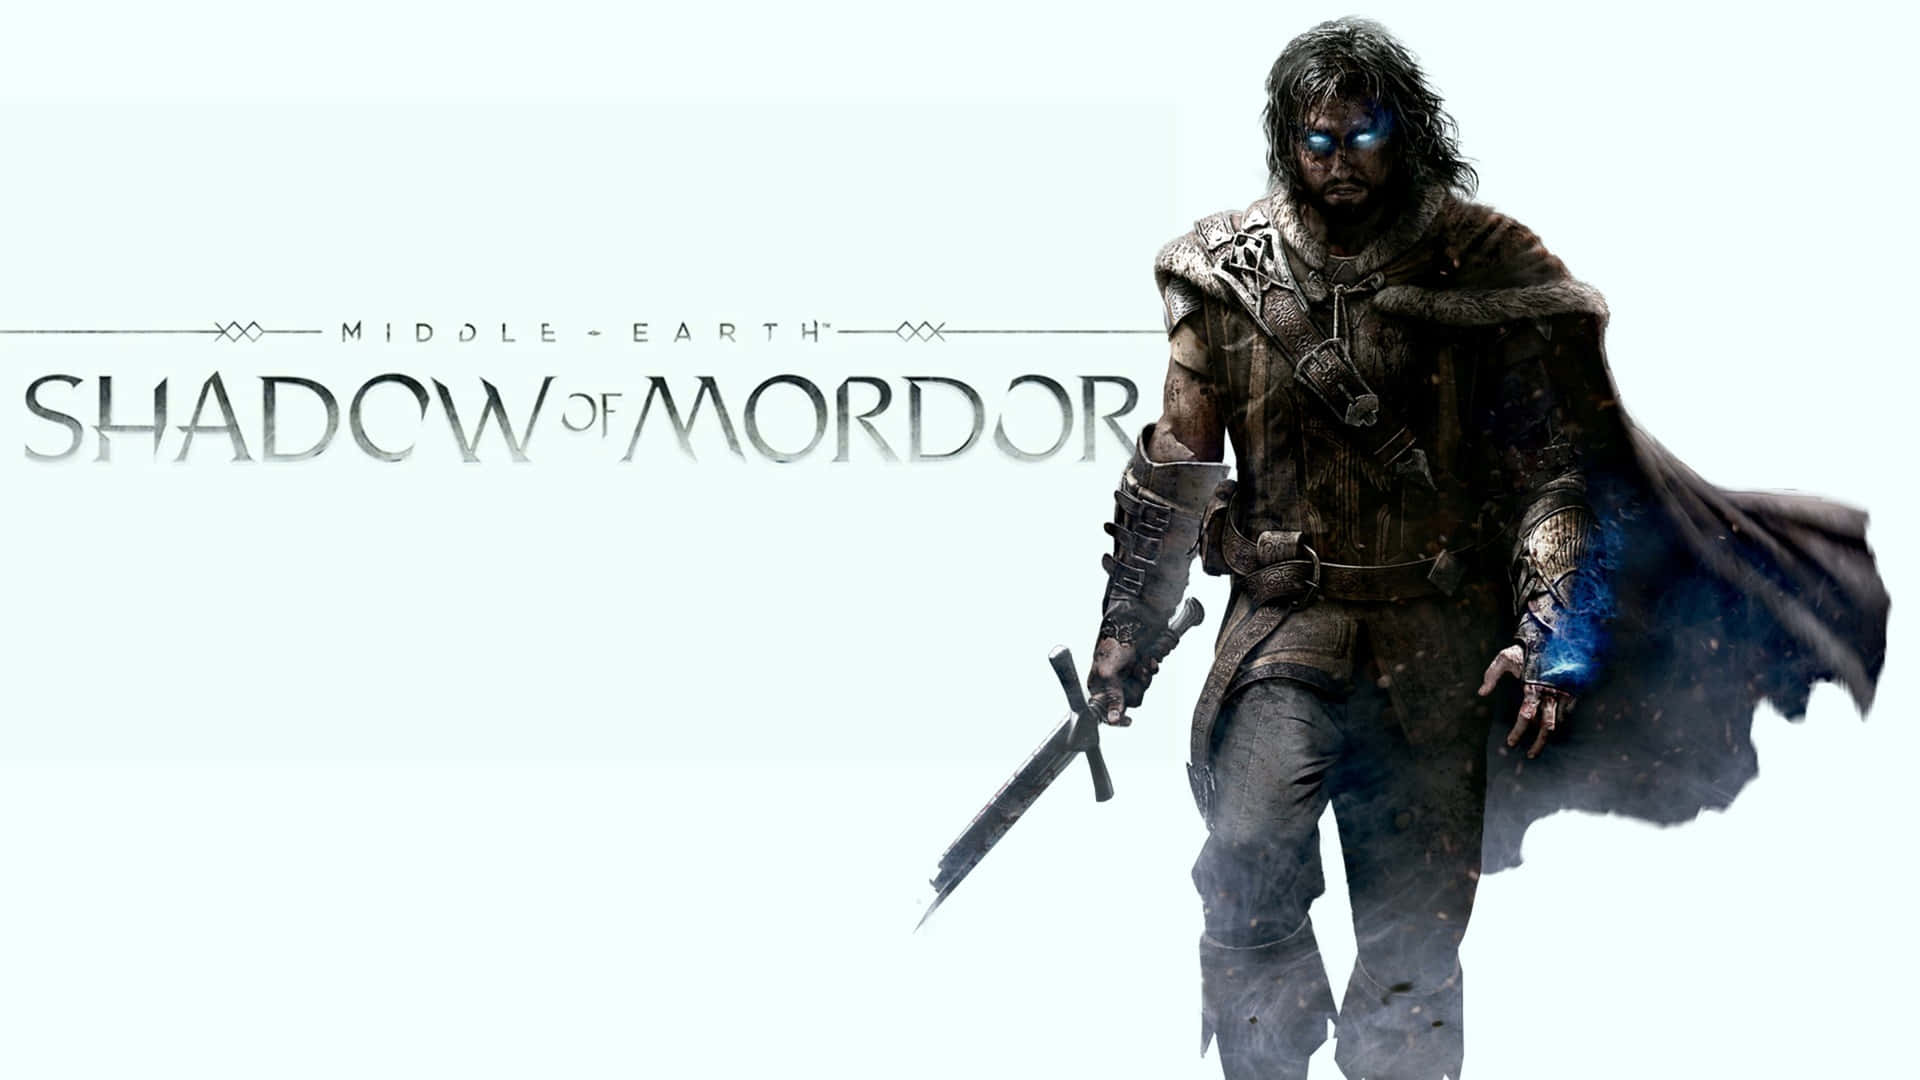 The Epic Adventure of Talion in Shadow of Mordor